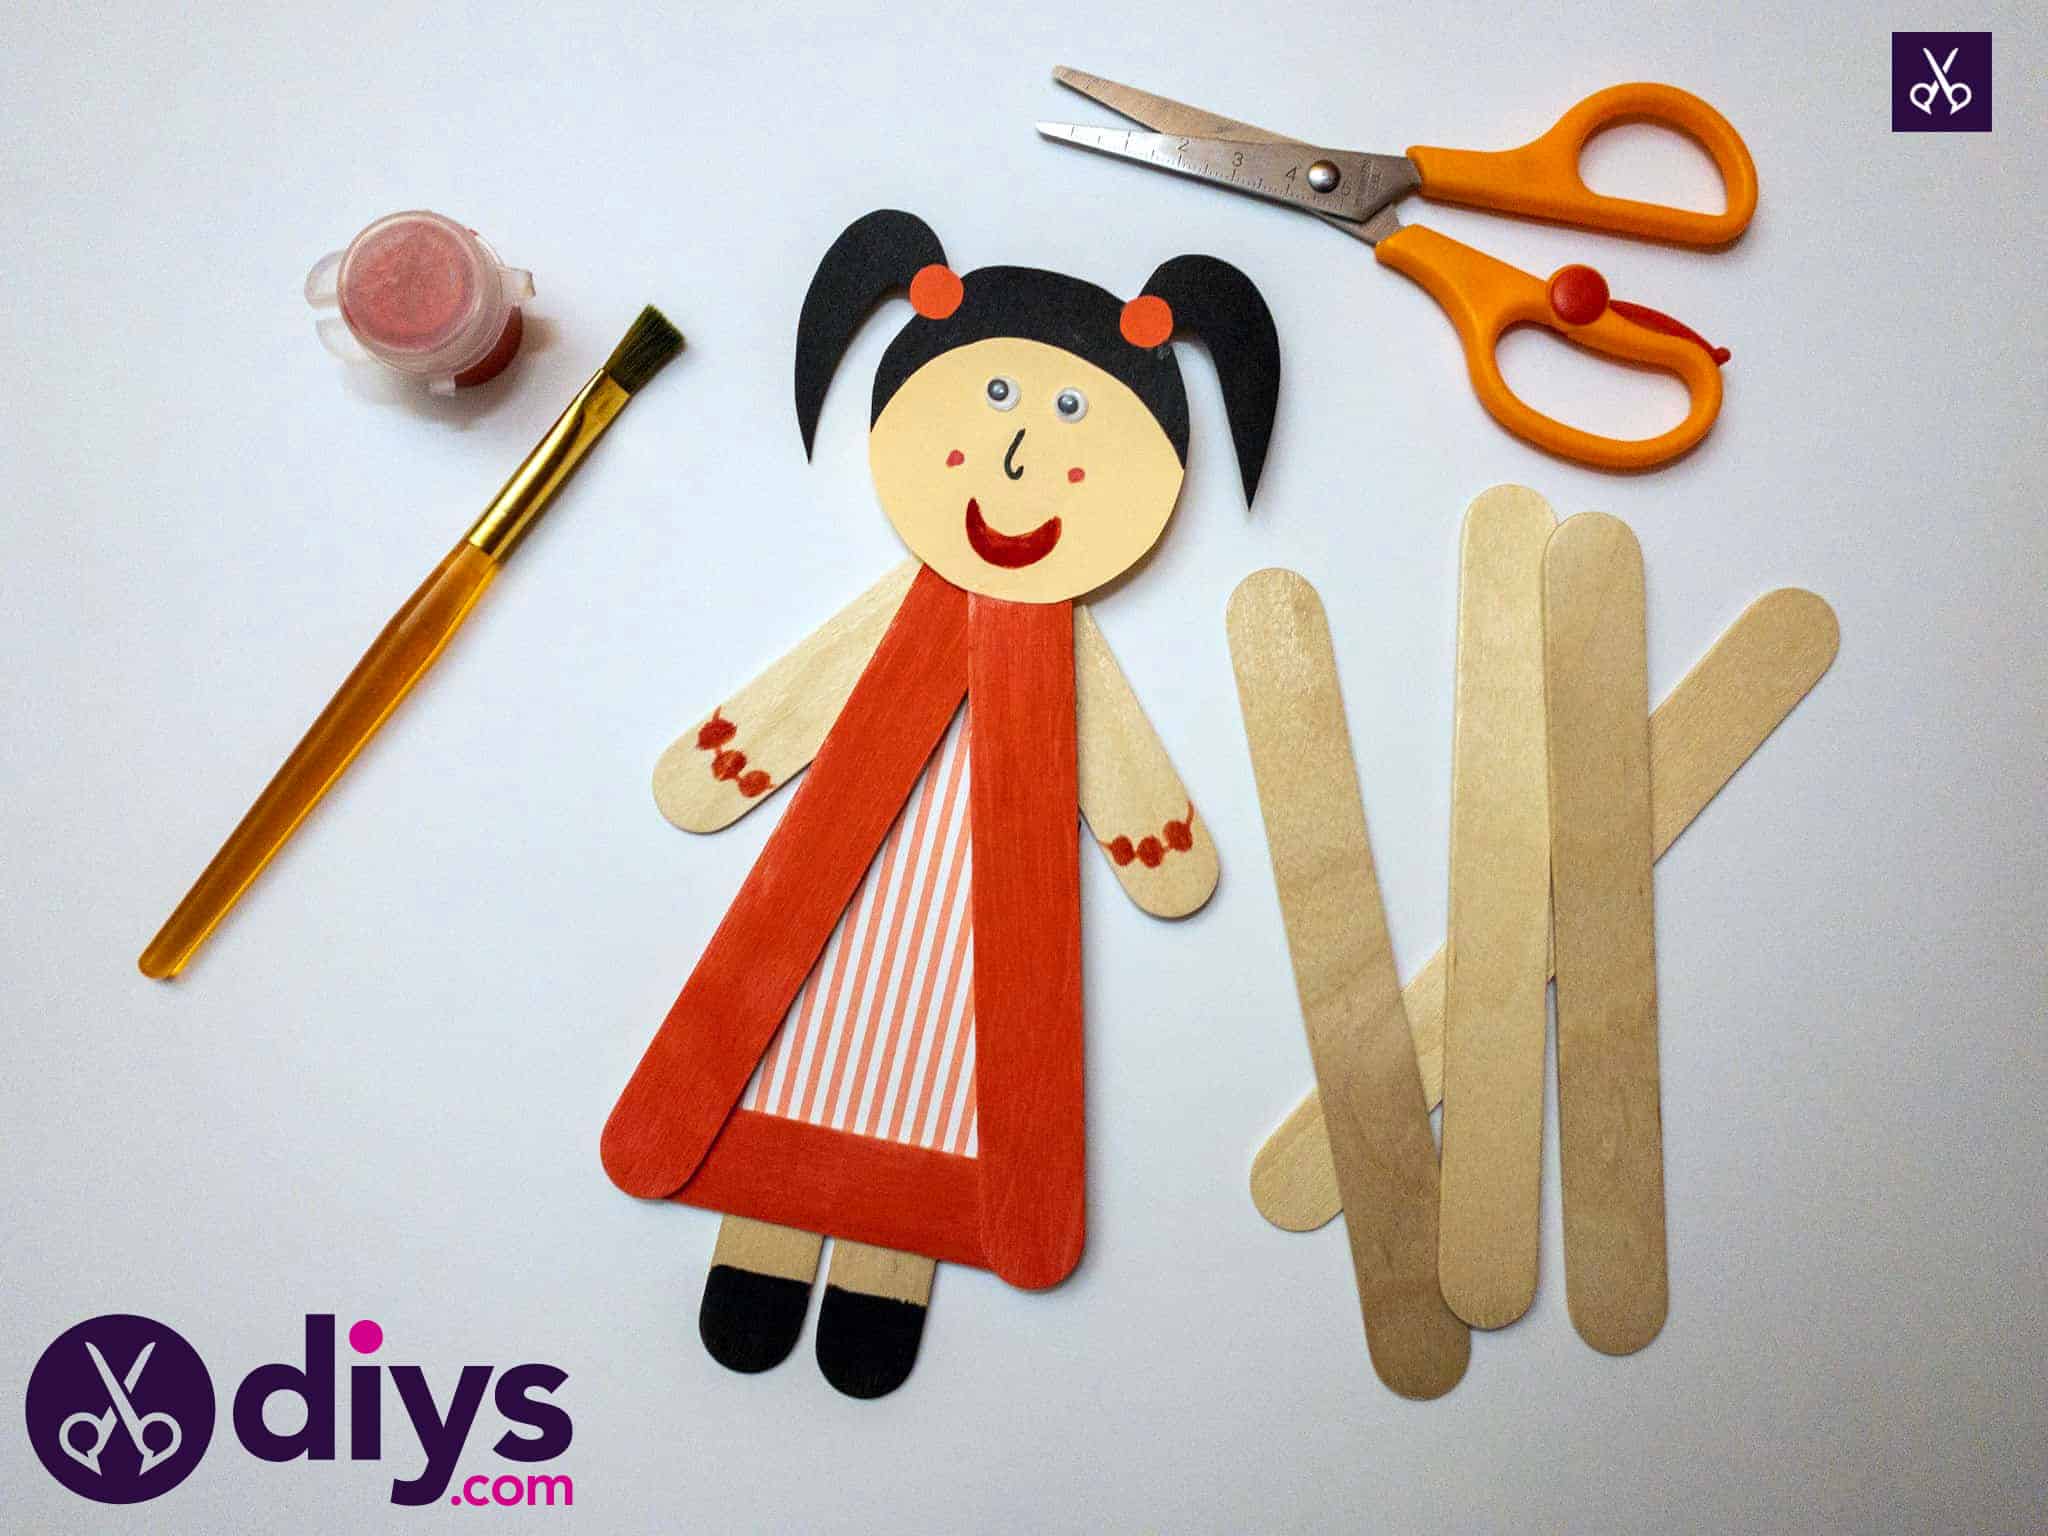 How to make a popsicle stick puppet